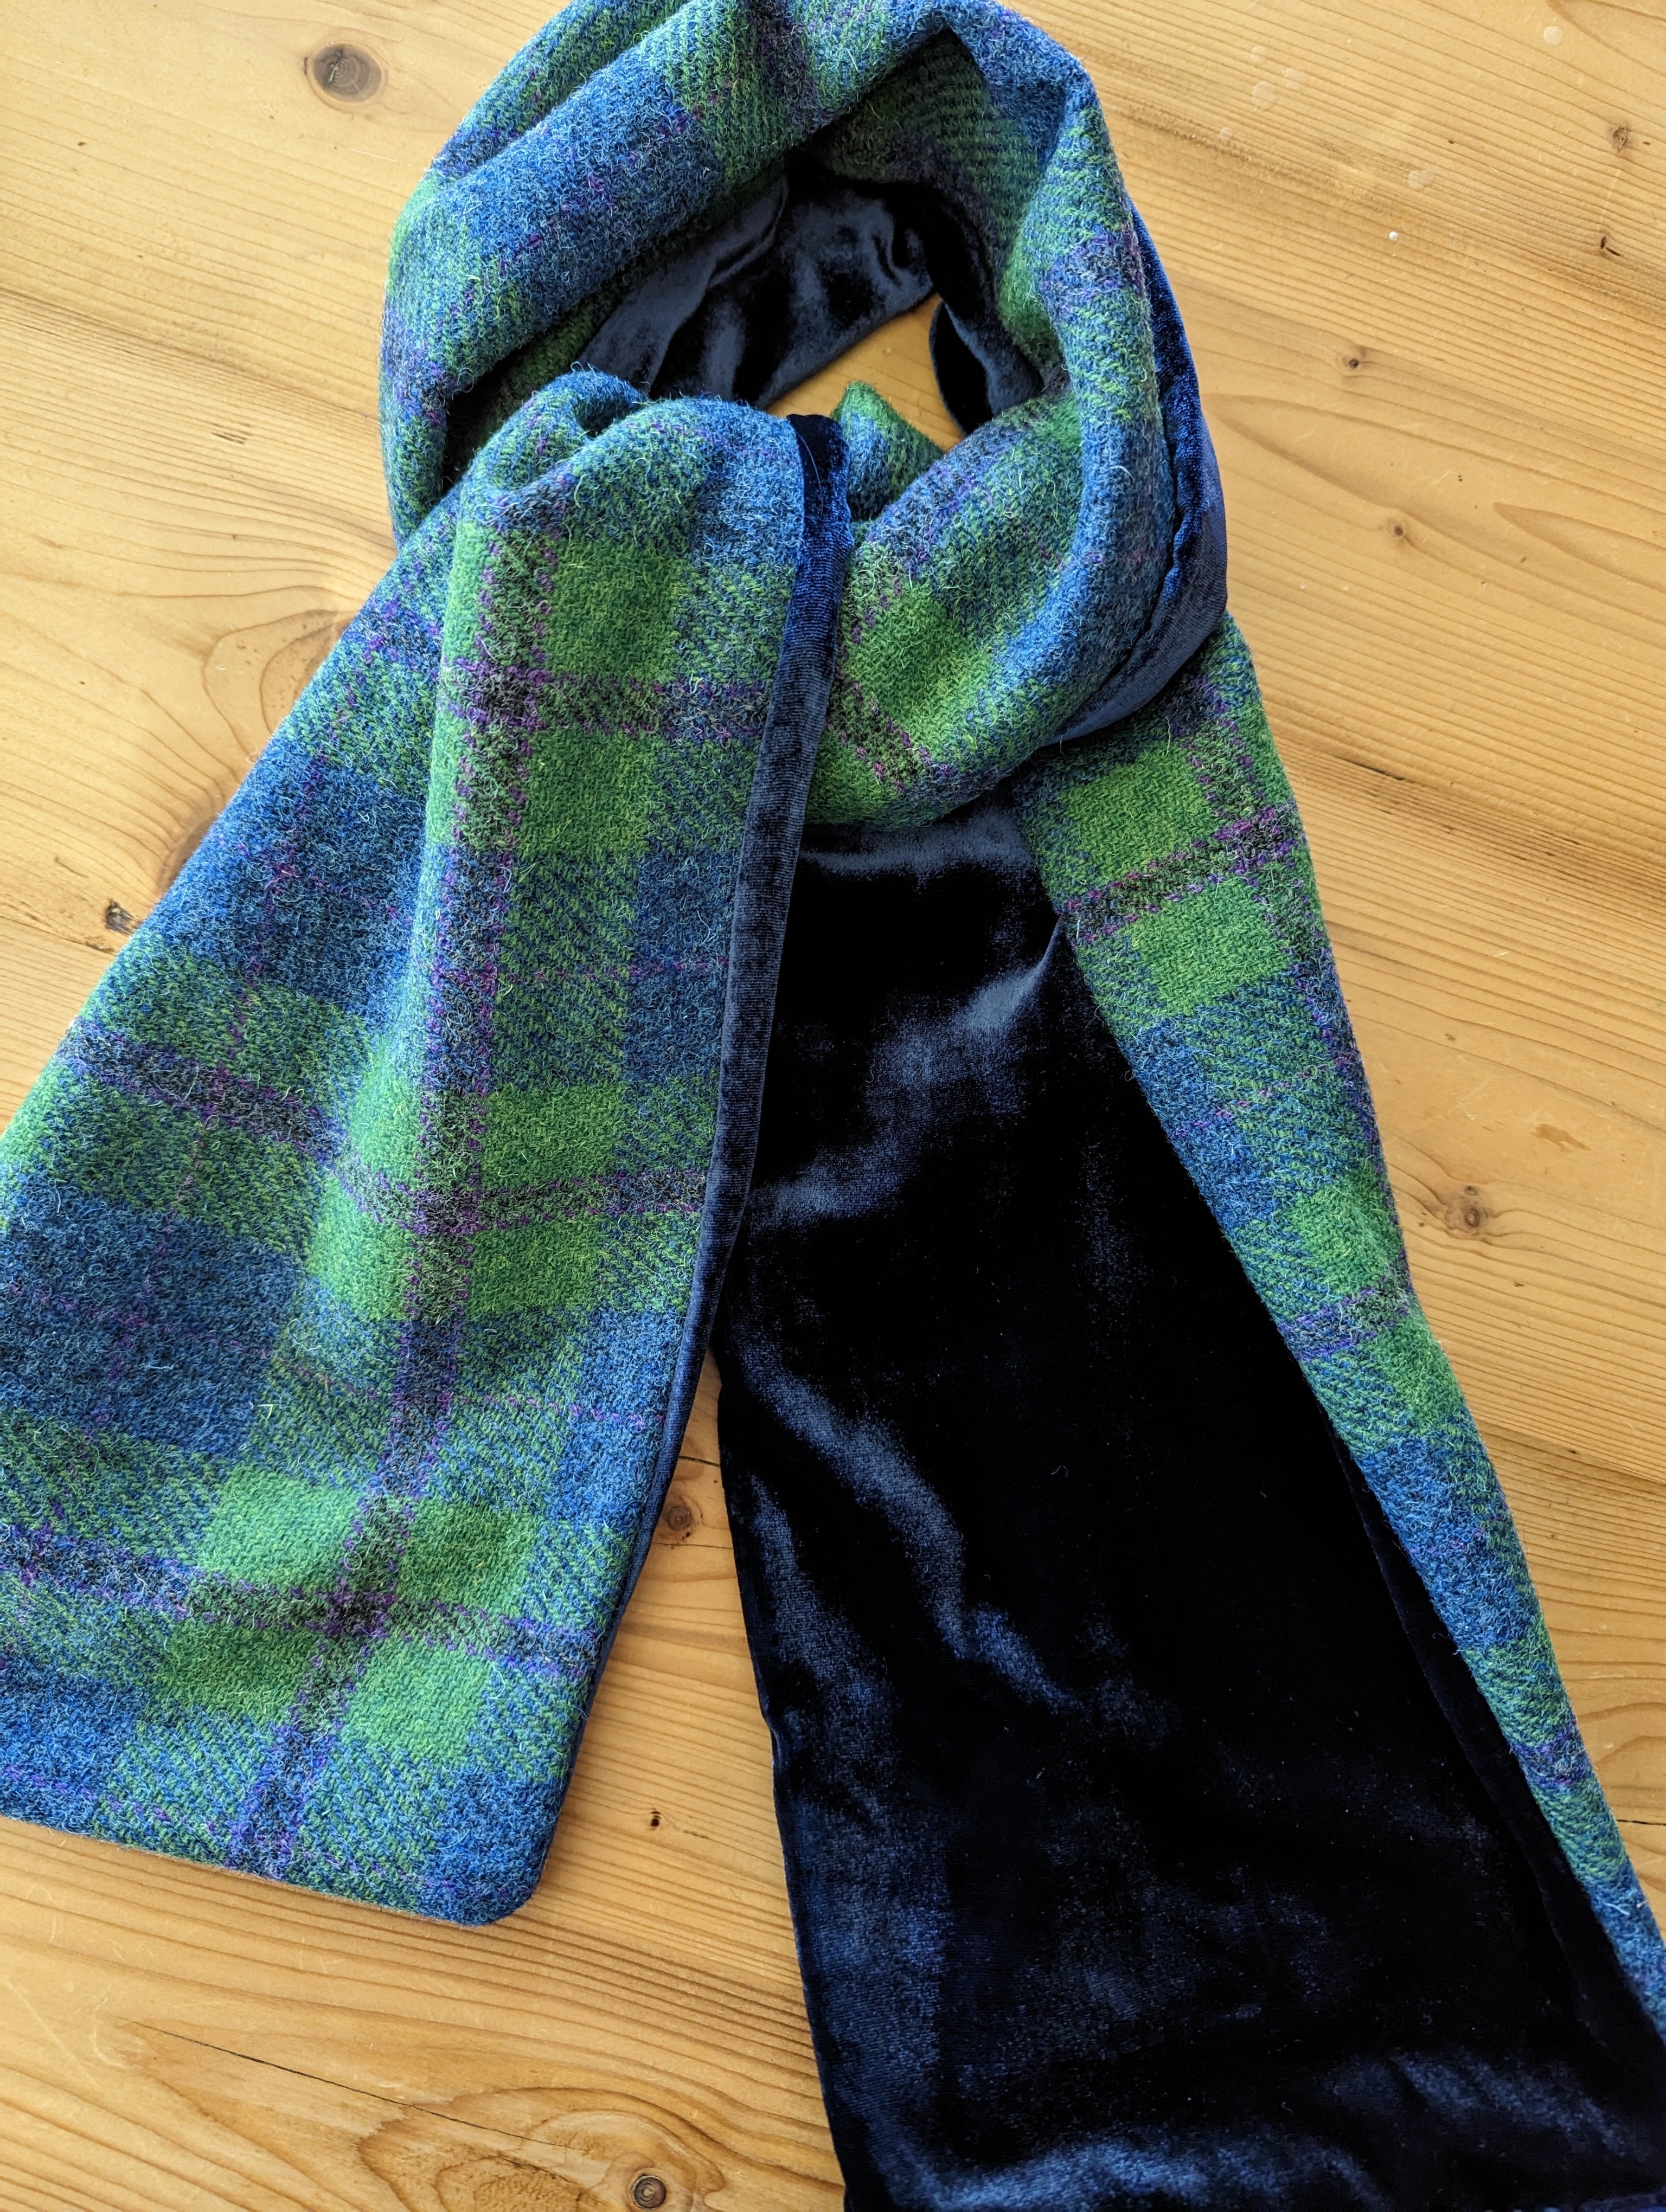 A Bluestocking Knits: Thoughts on the Vintage Velvet Scarf